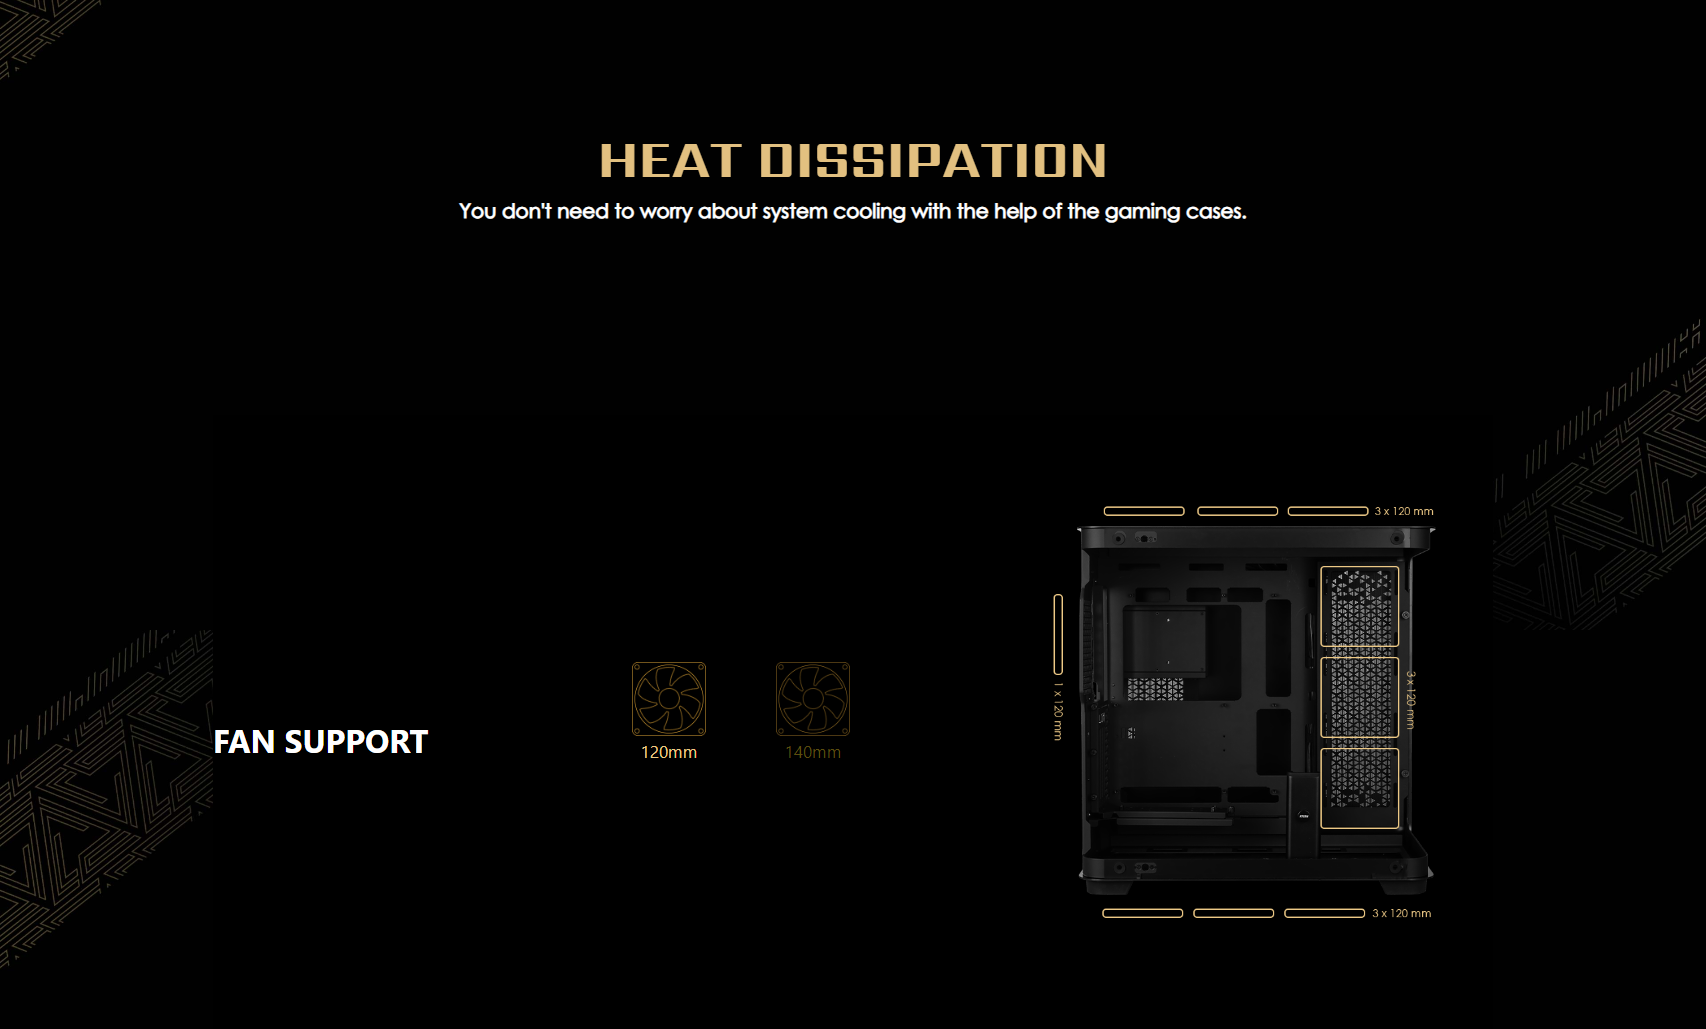 You don't need to worry about system cooling with the help of the gaming cases.